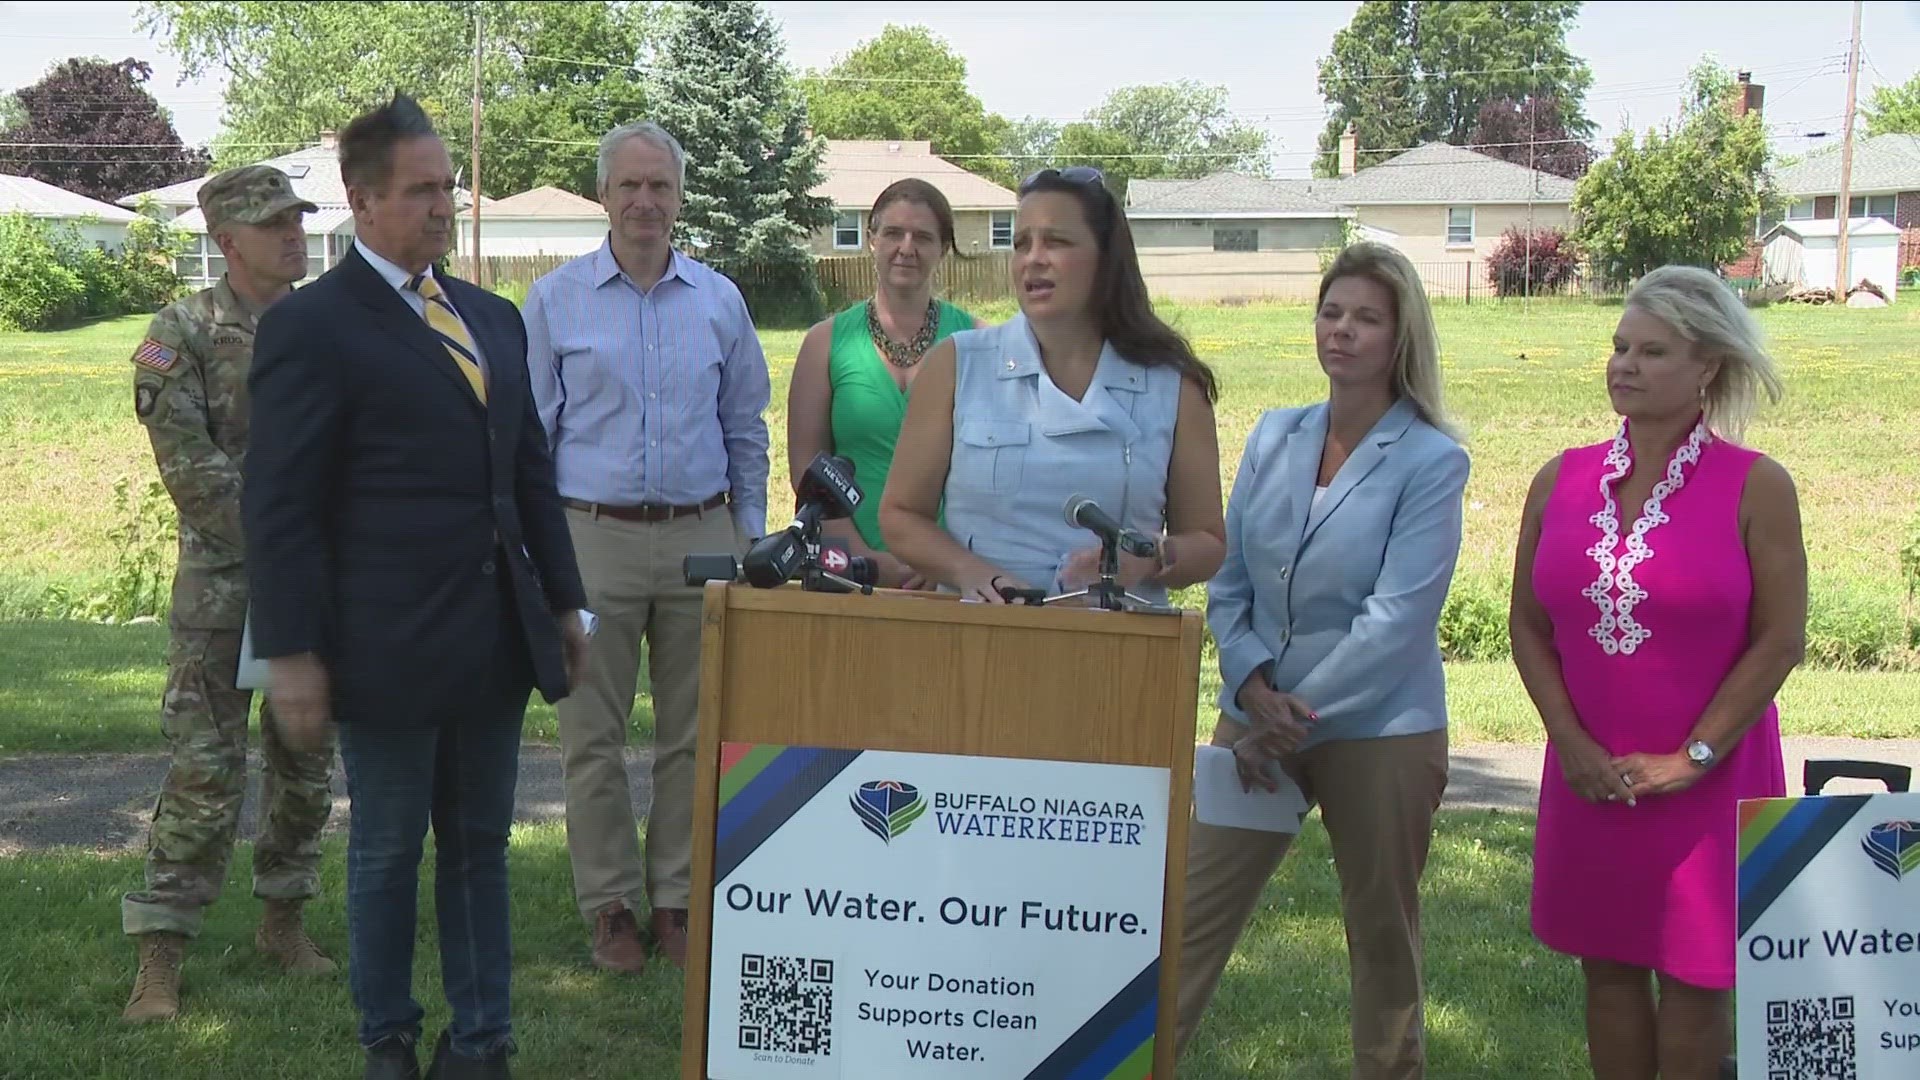 officials from Buffalo Niagara water keeper --- signed a cost sharing agreement with the us army corps of engineers for a feasibility study on best ways to clean up